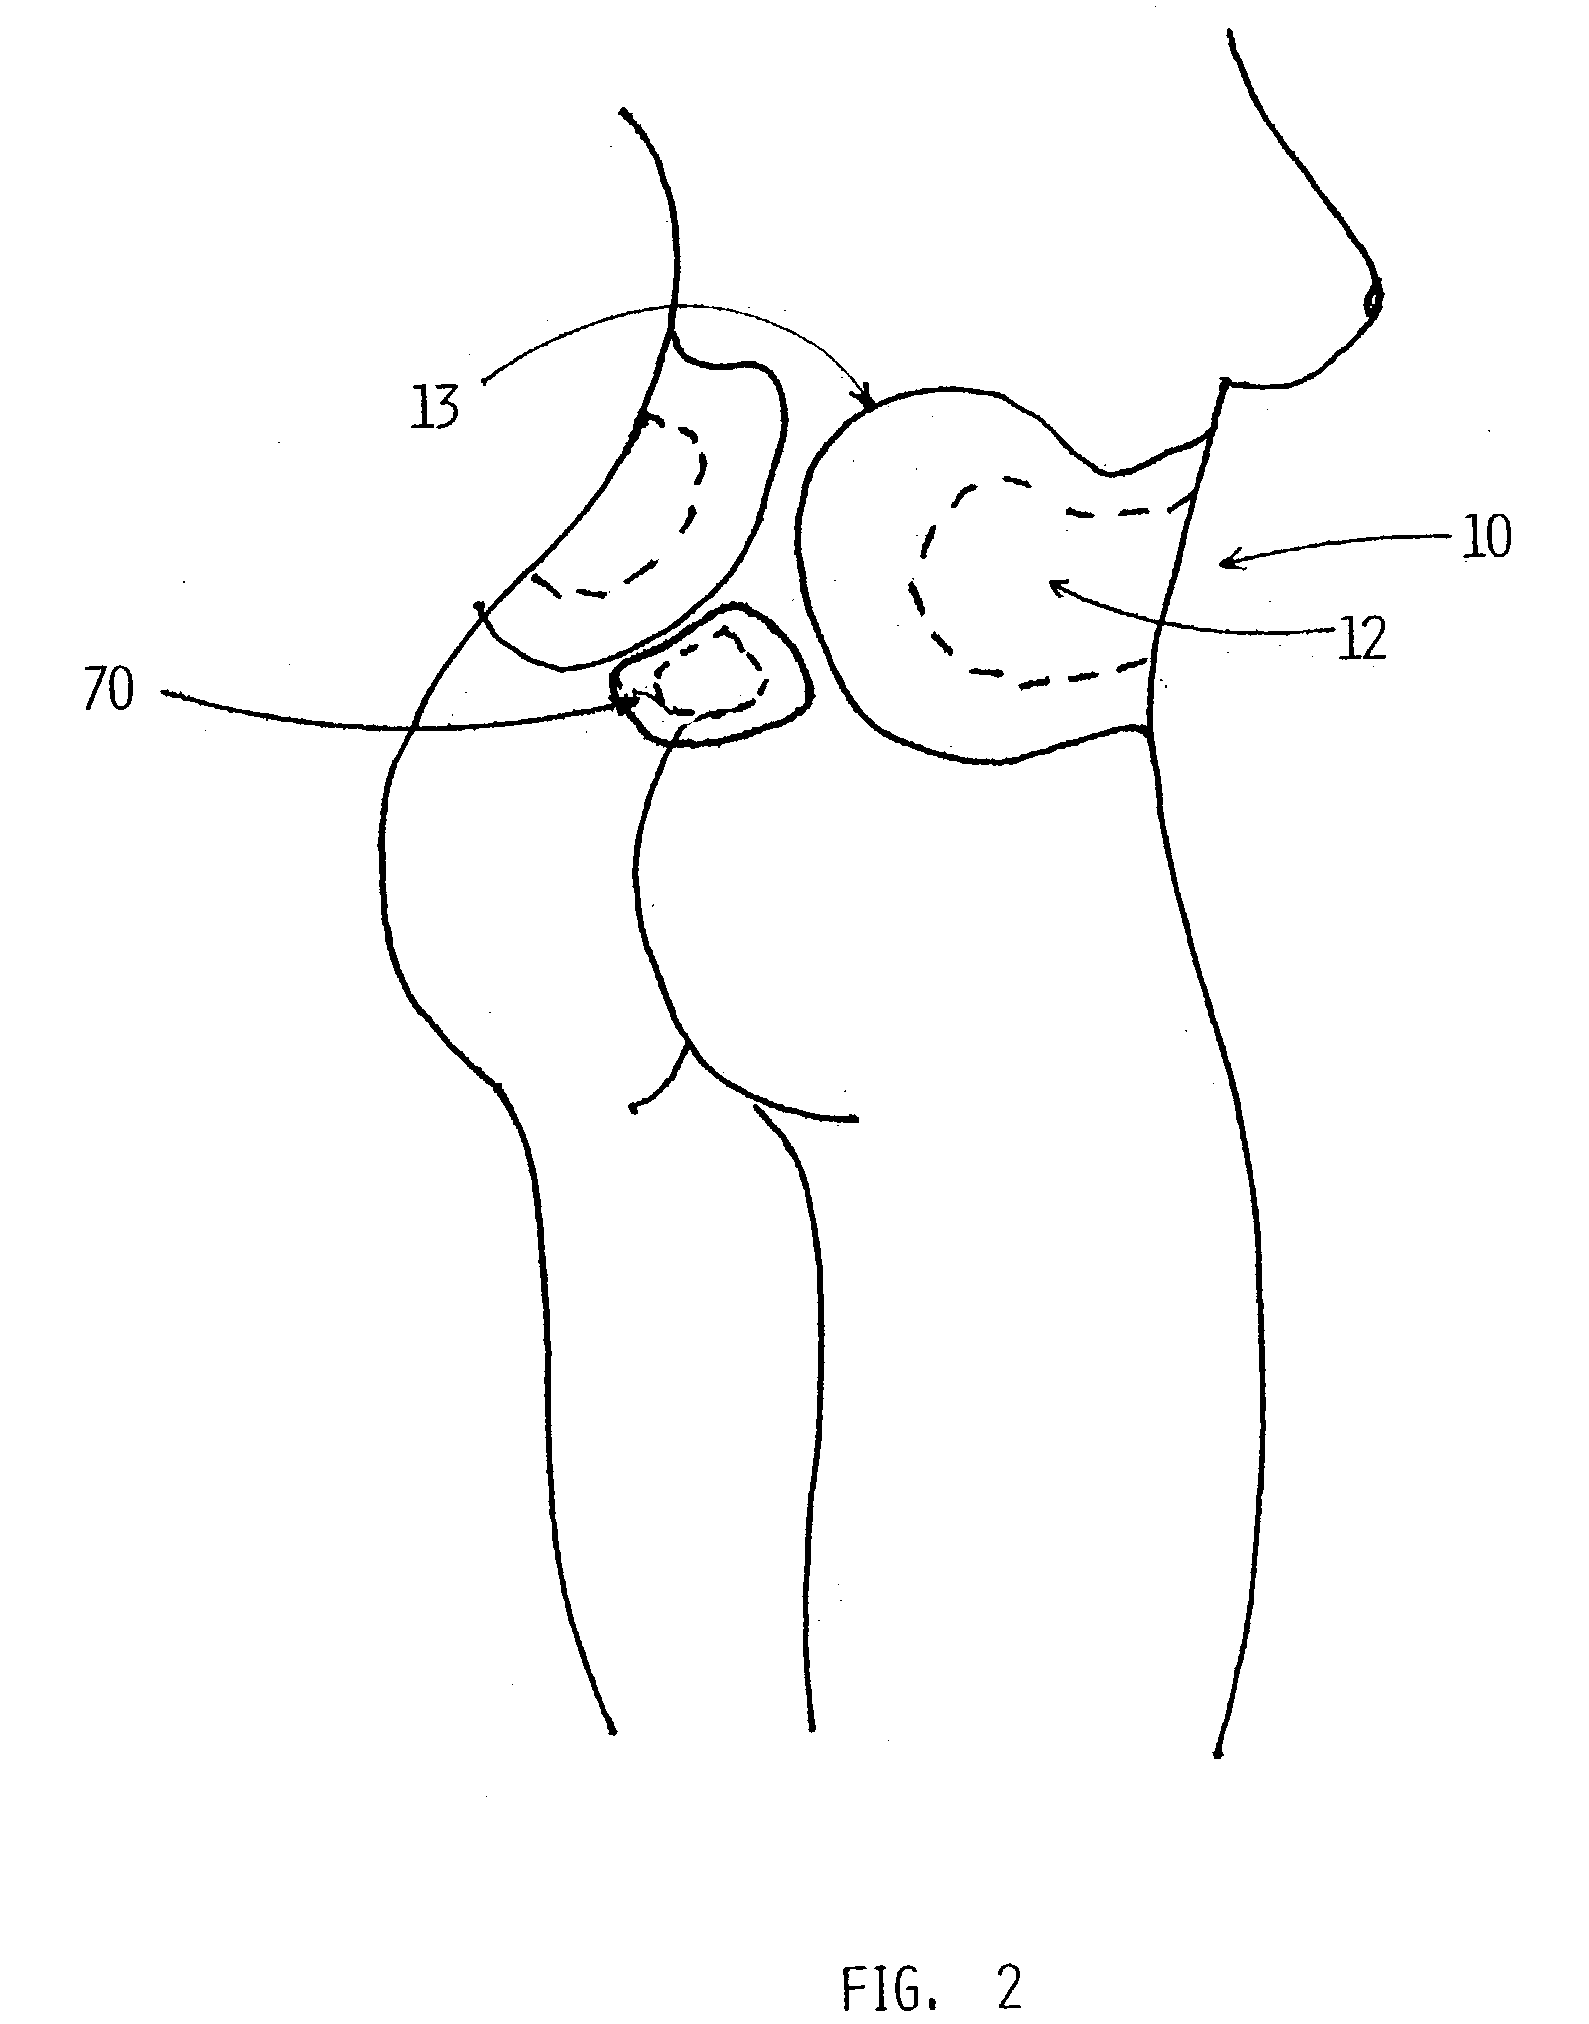 Anatomical compression pad system